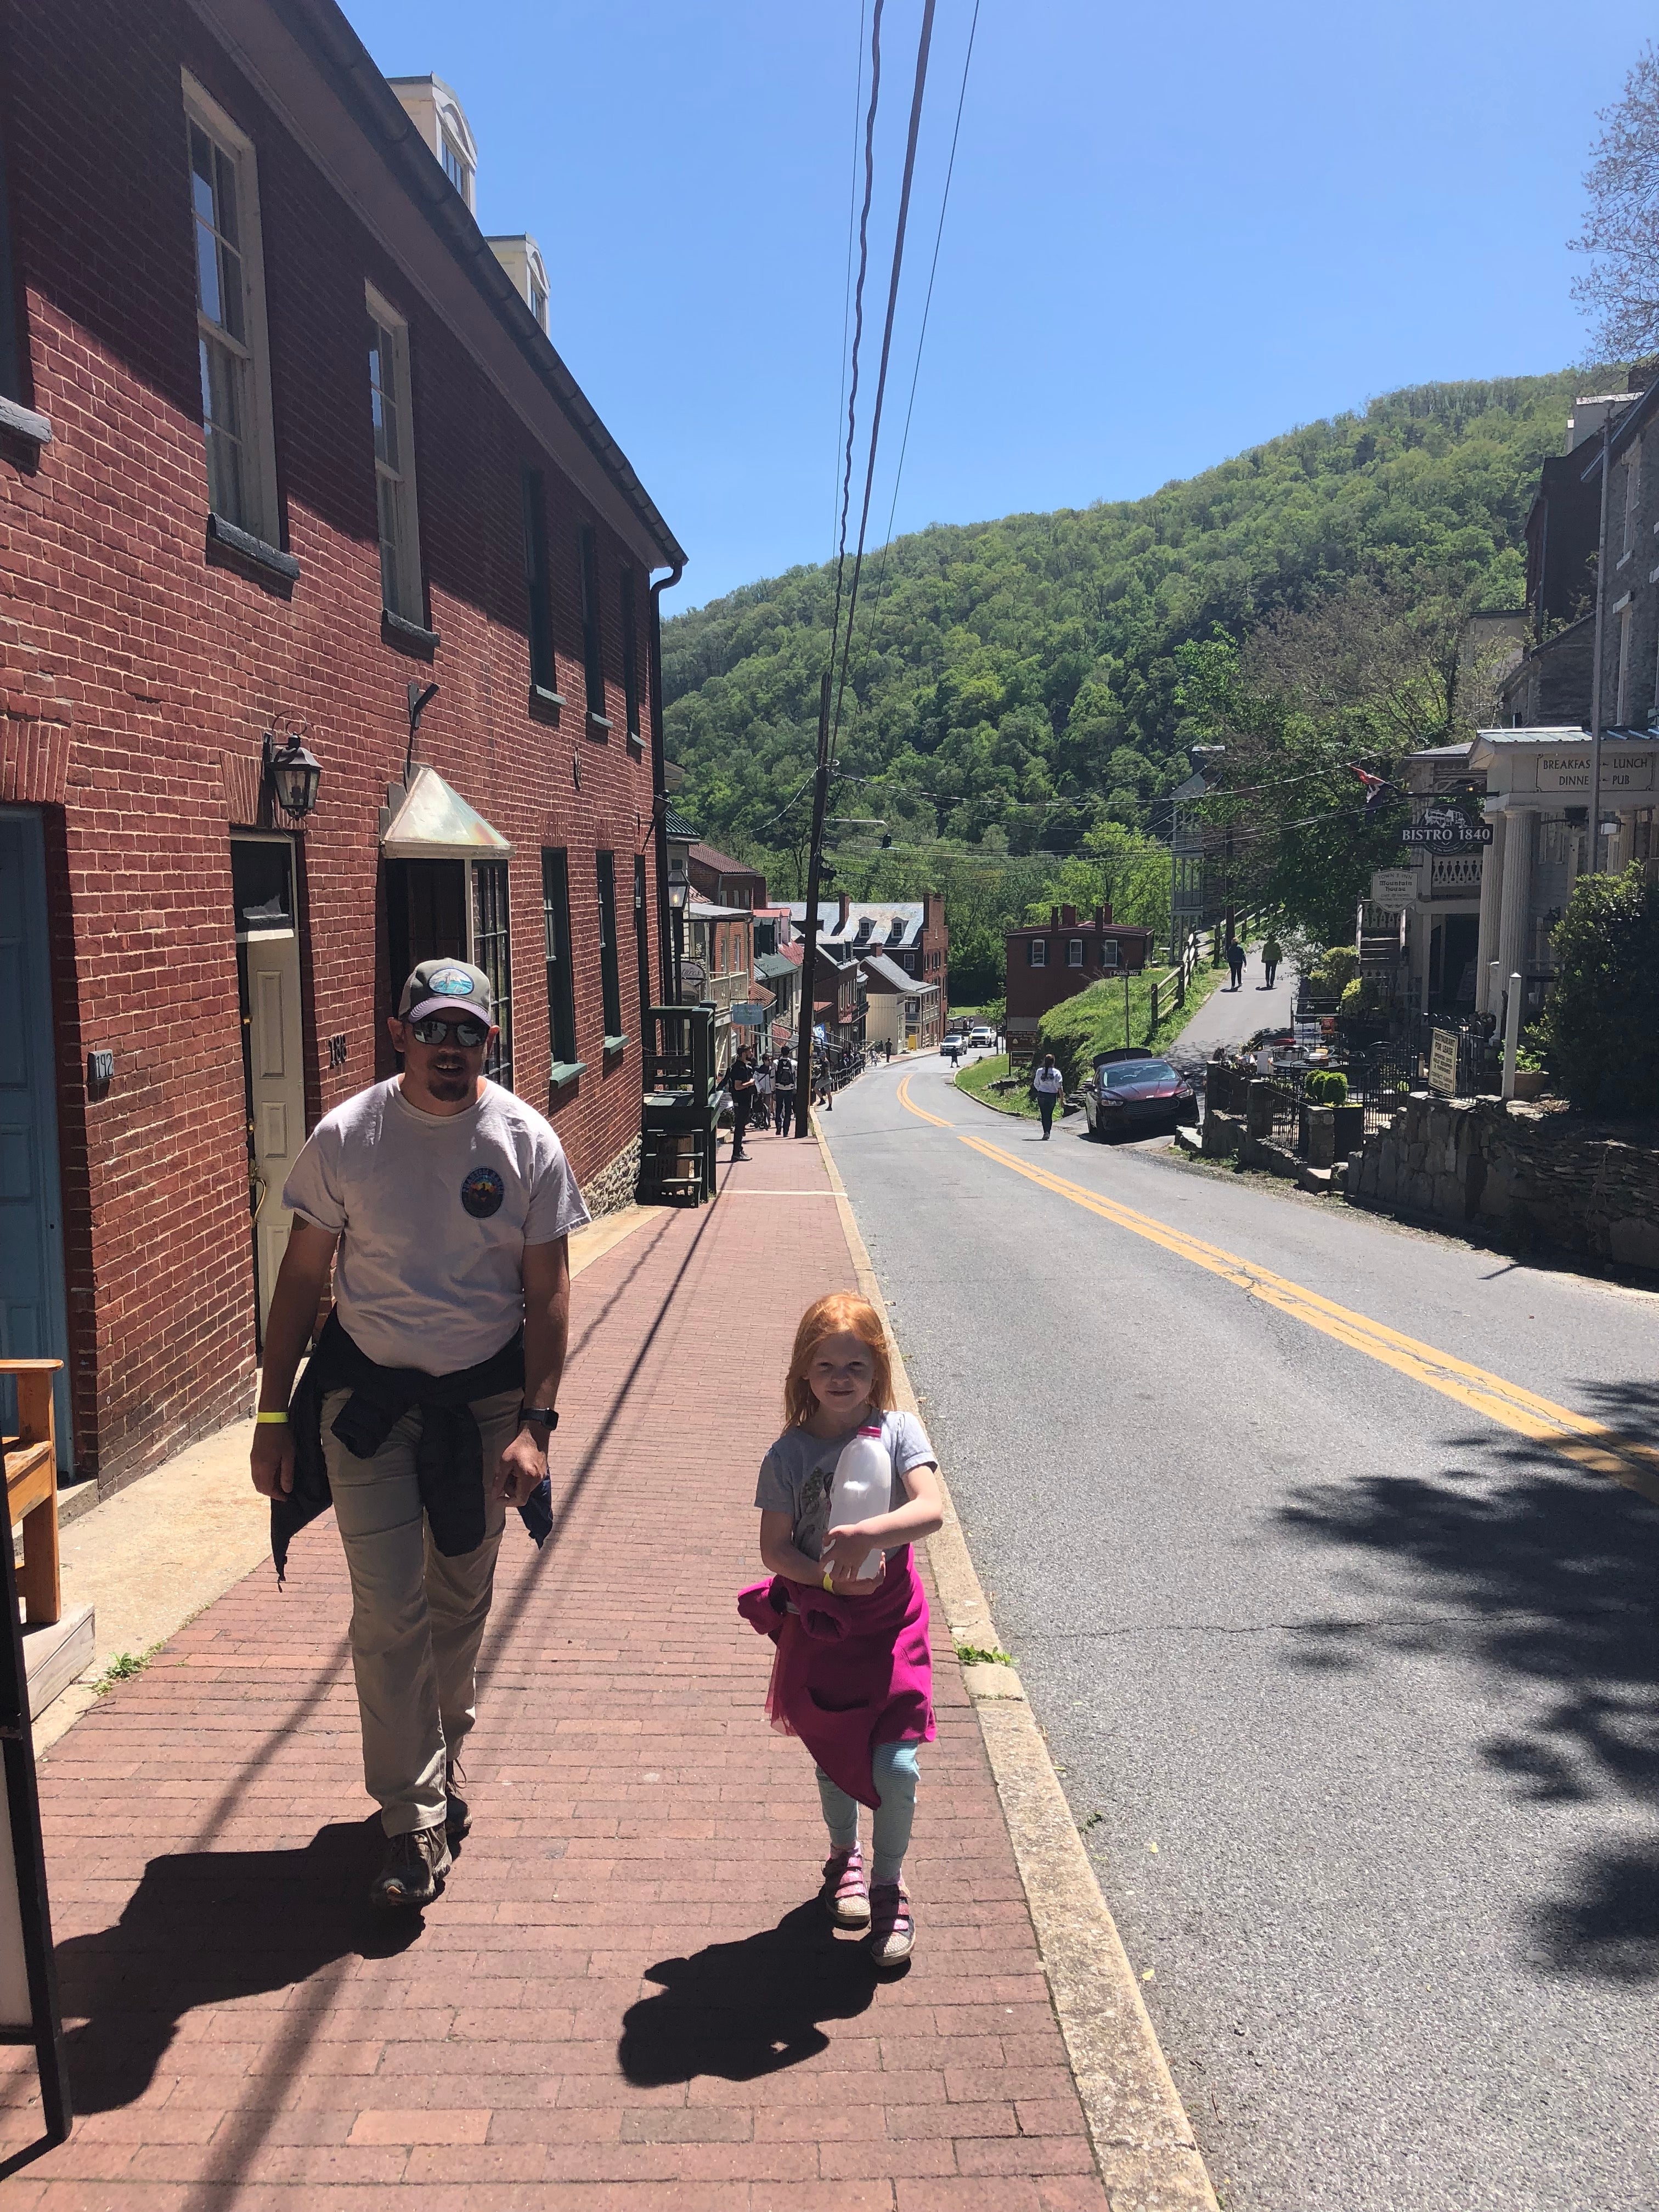 Walking around Harper's Ferry. We were there during Water Fest, so my daughter carried a half gallon of water around the block to understand how kids everywhere don't have close access to water.